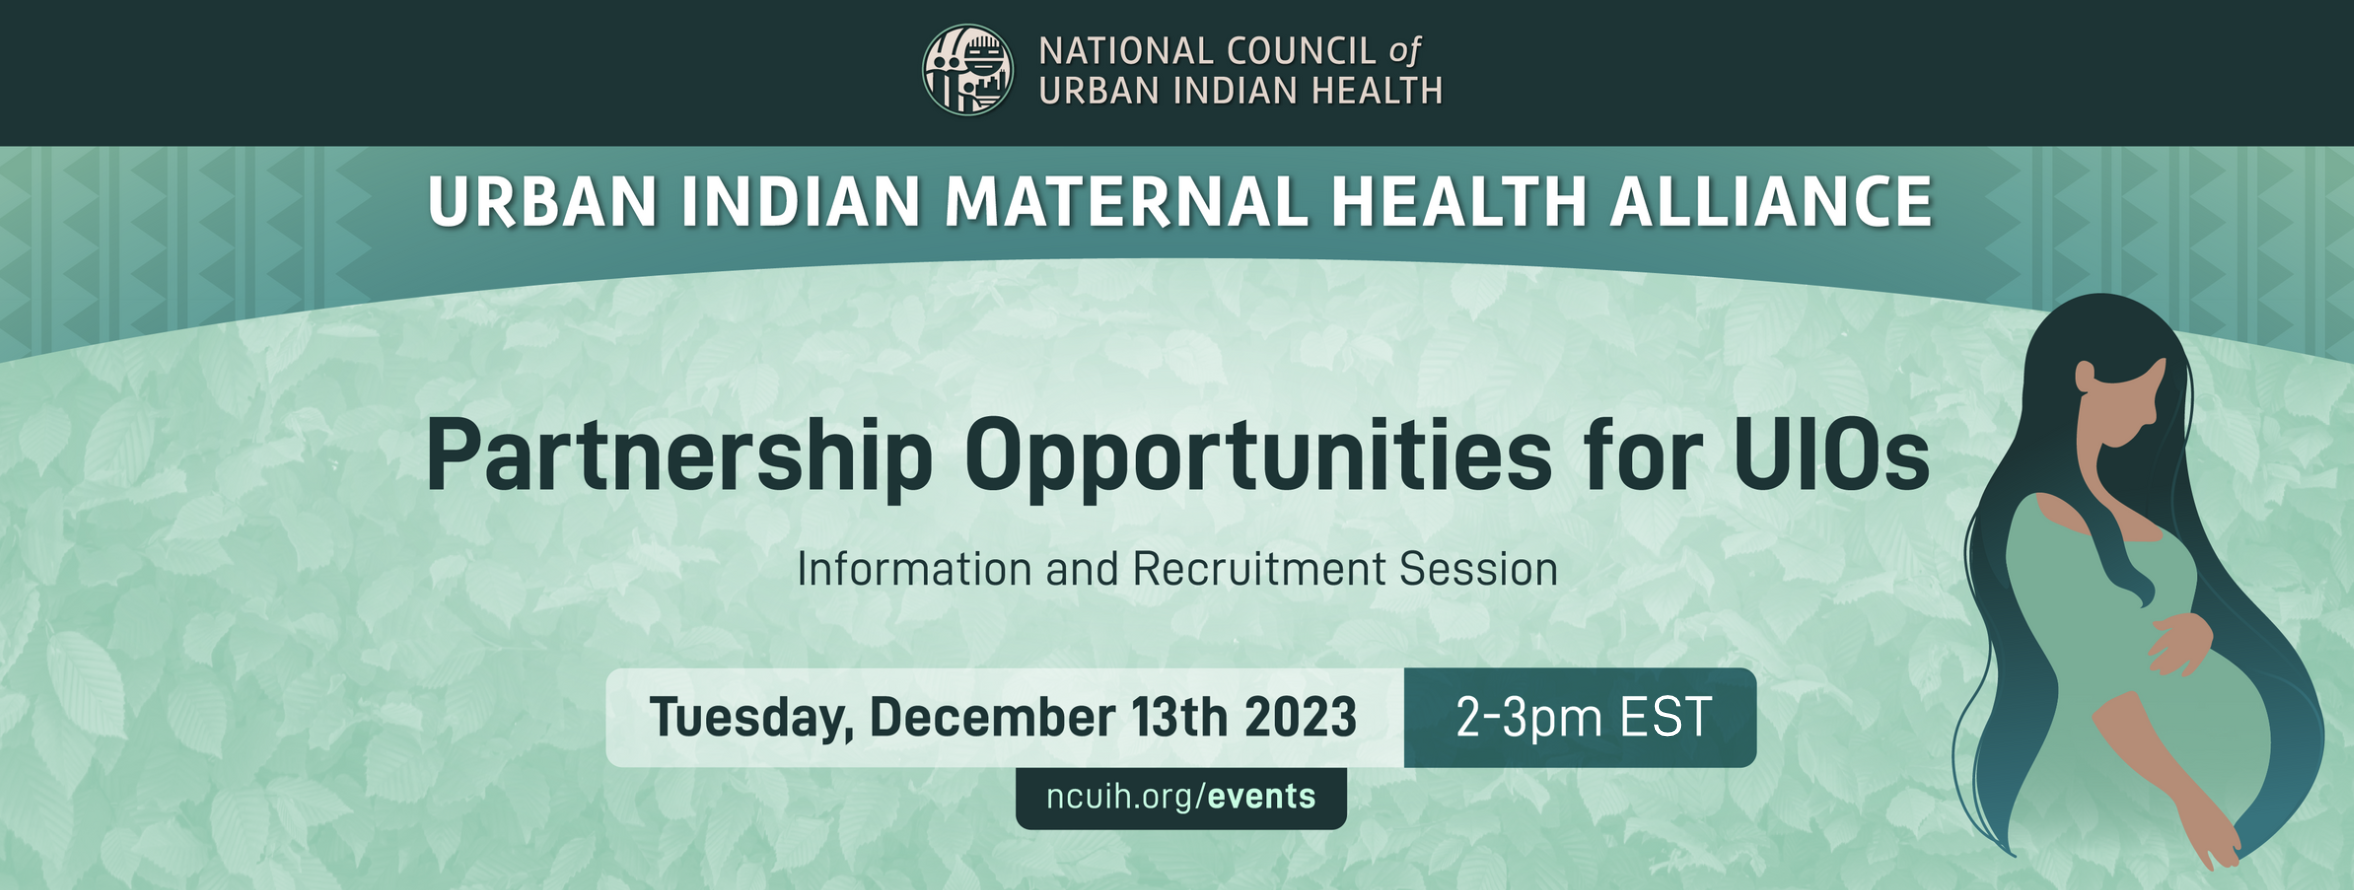 Urban Indian Maternal Health Alliance: Partnership Opportunities for UIOs Information and Recruitment Session